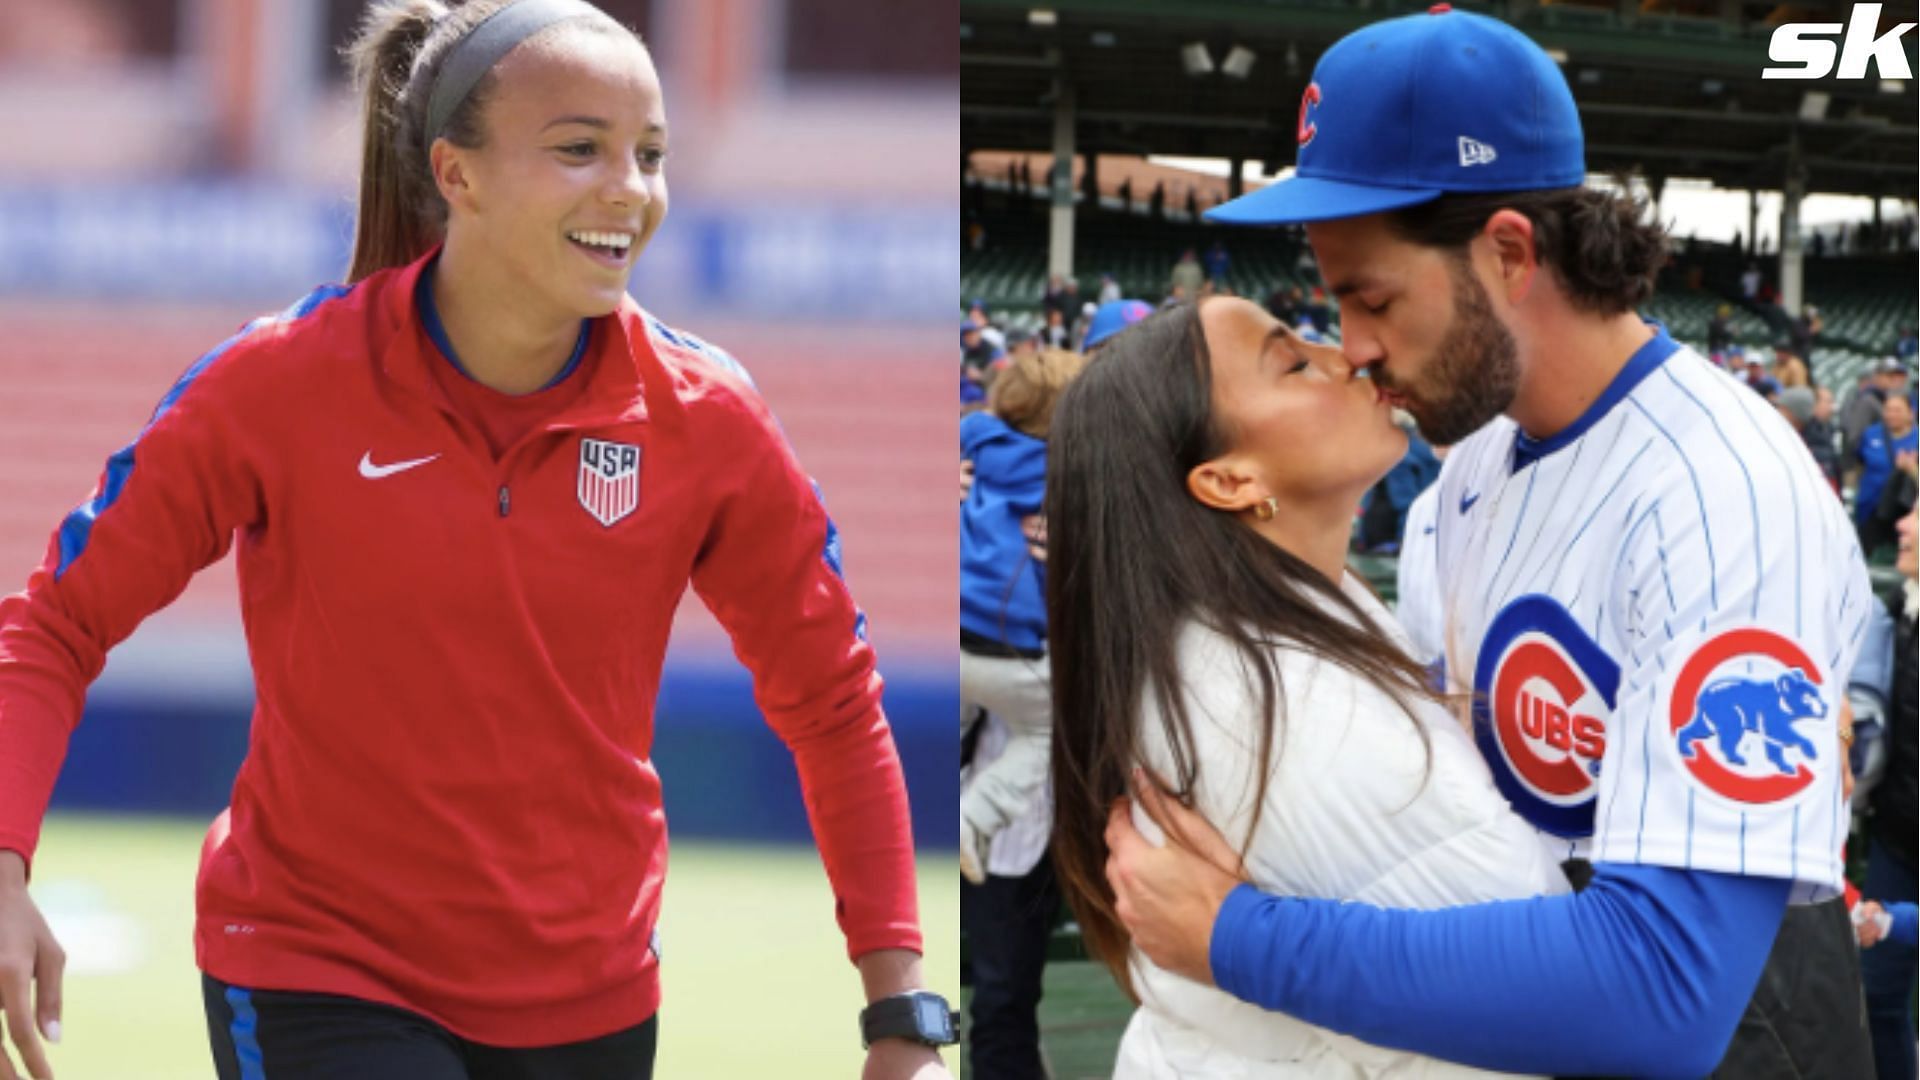 USWNT star Mallory Pugh, Braves' Dansby Swanson announce